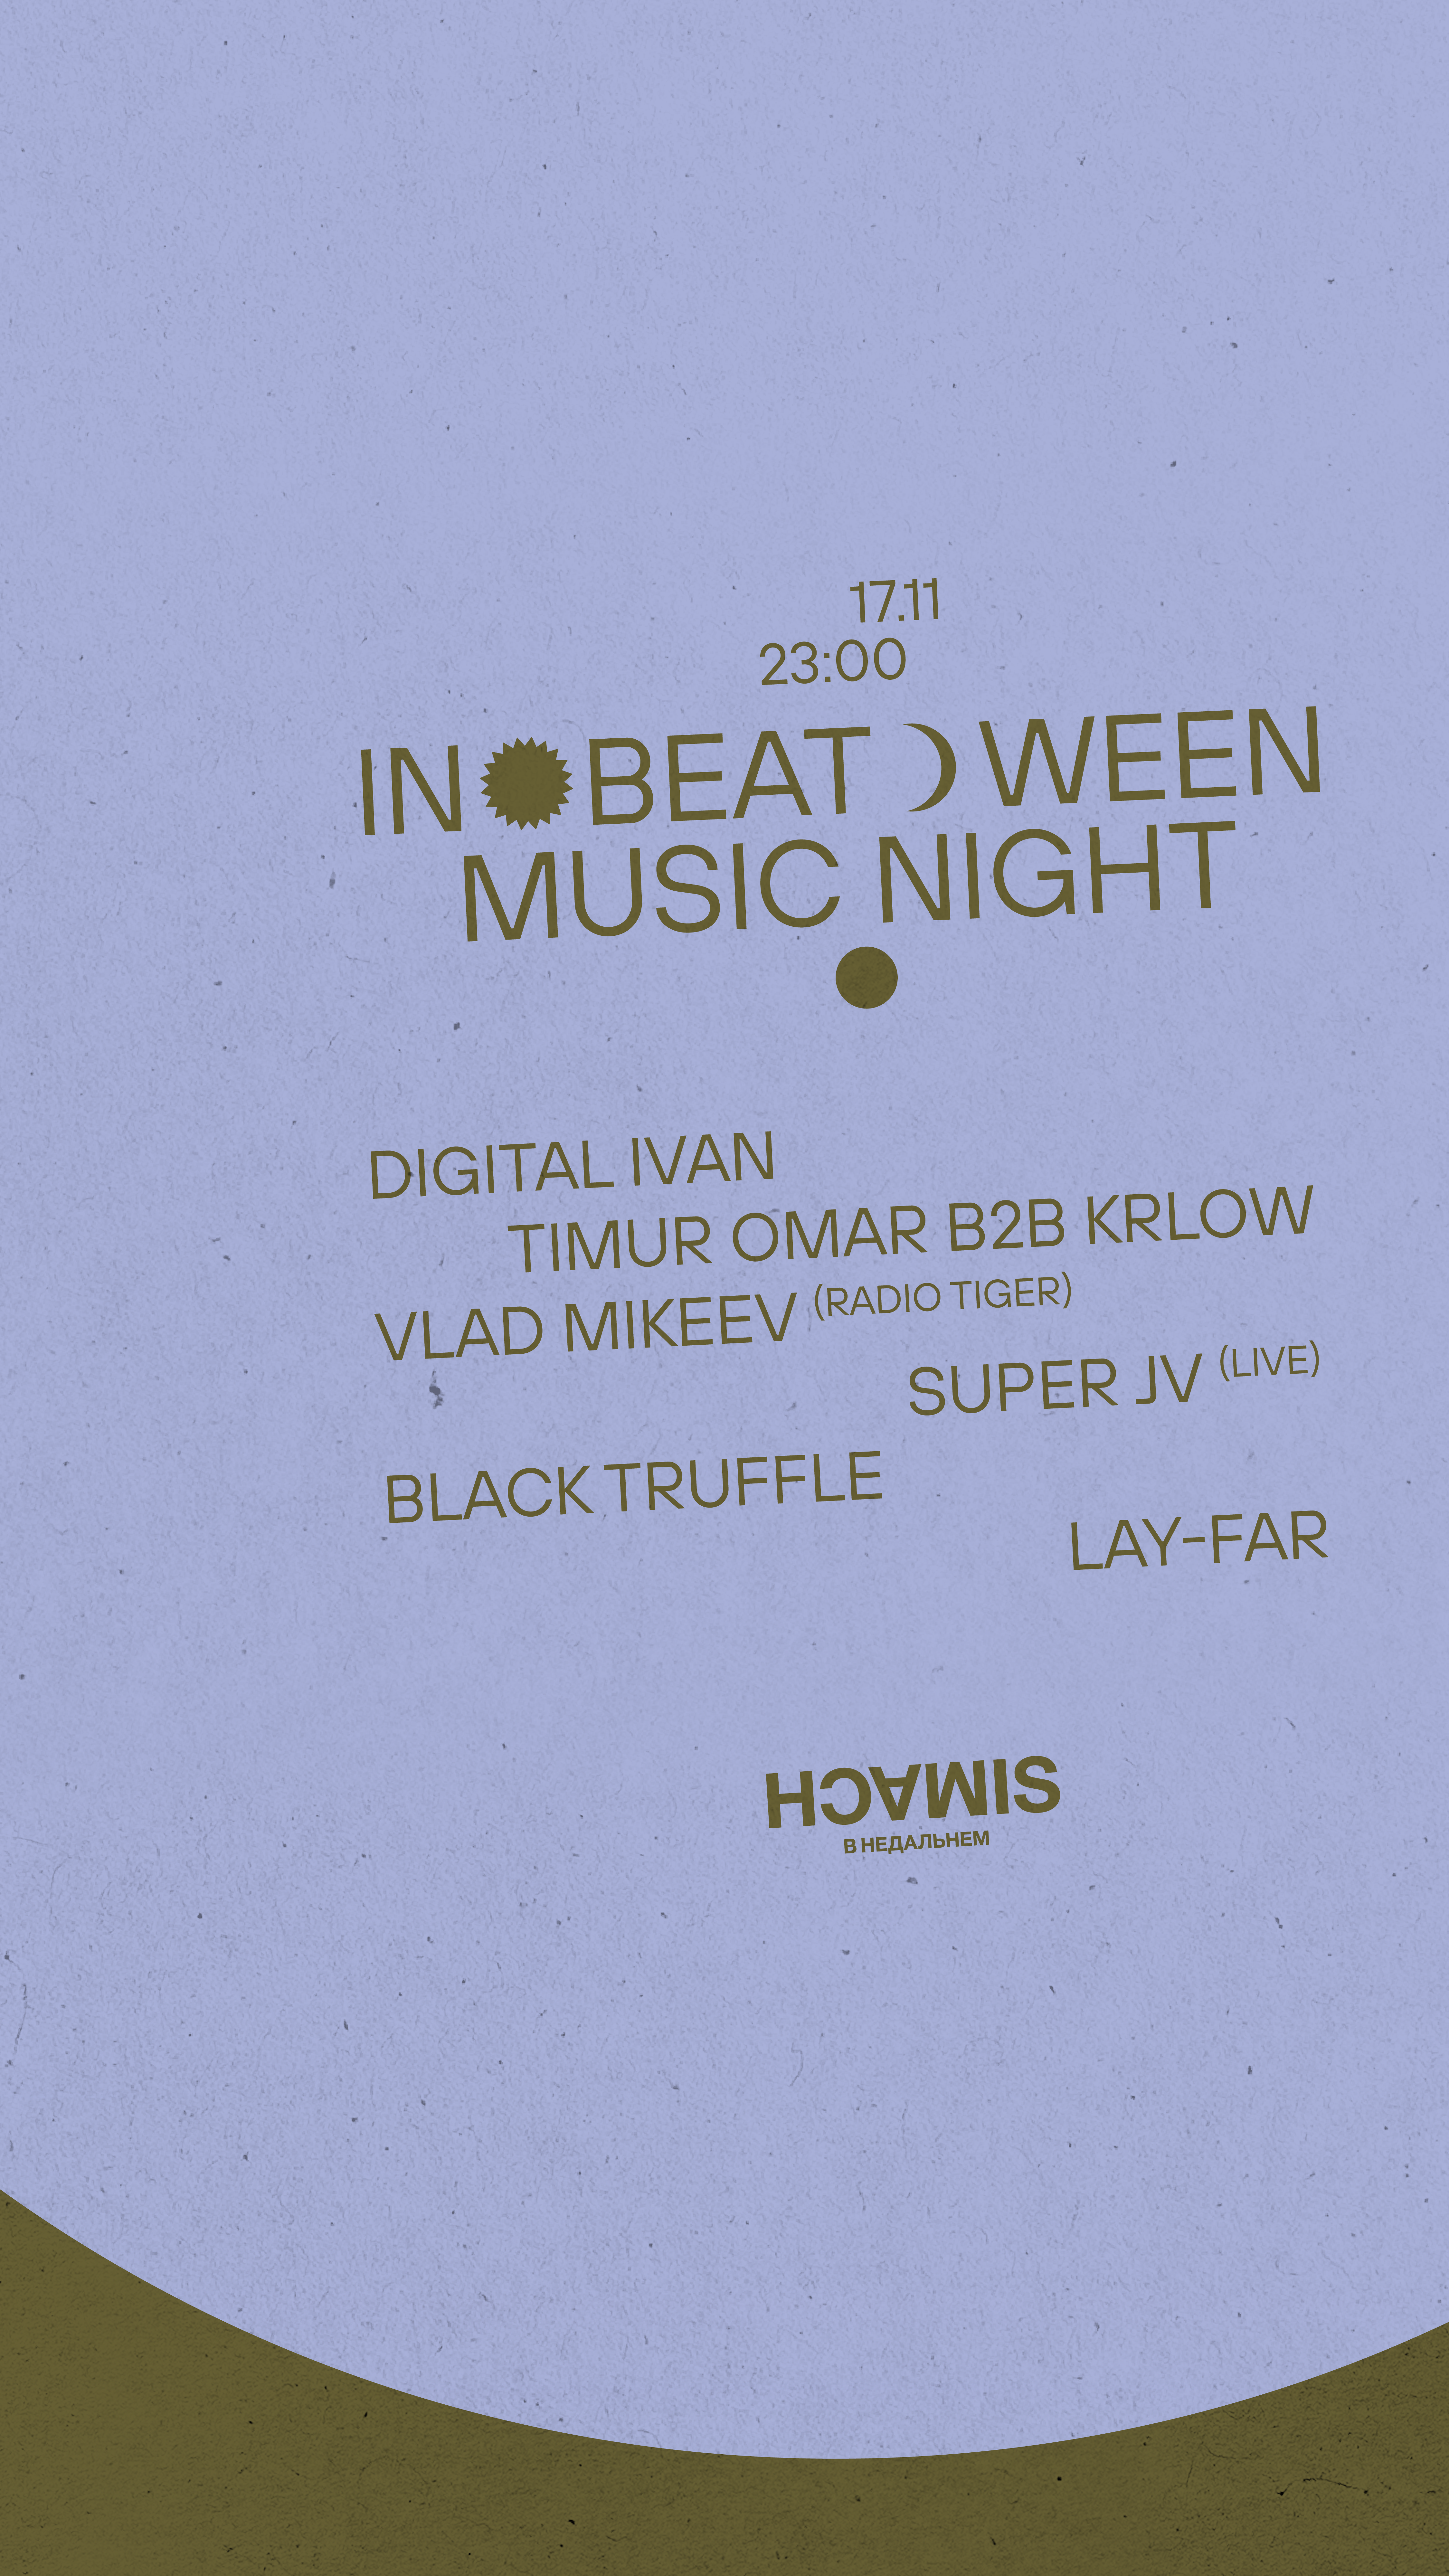 In-Beat-Ween Music Night - フライヤー表